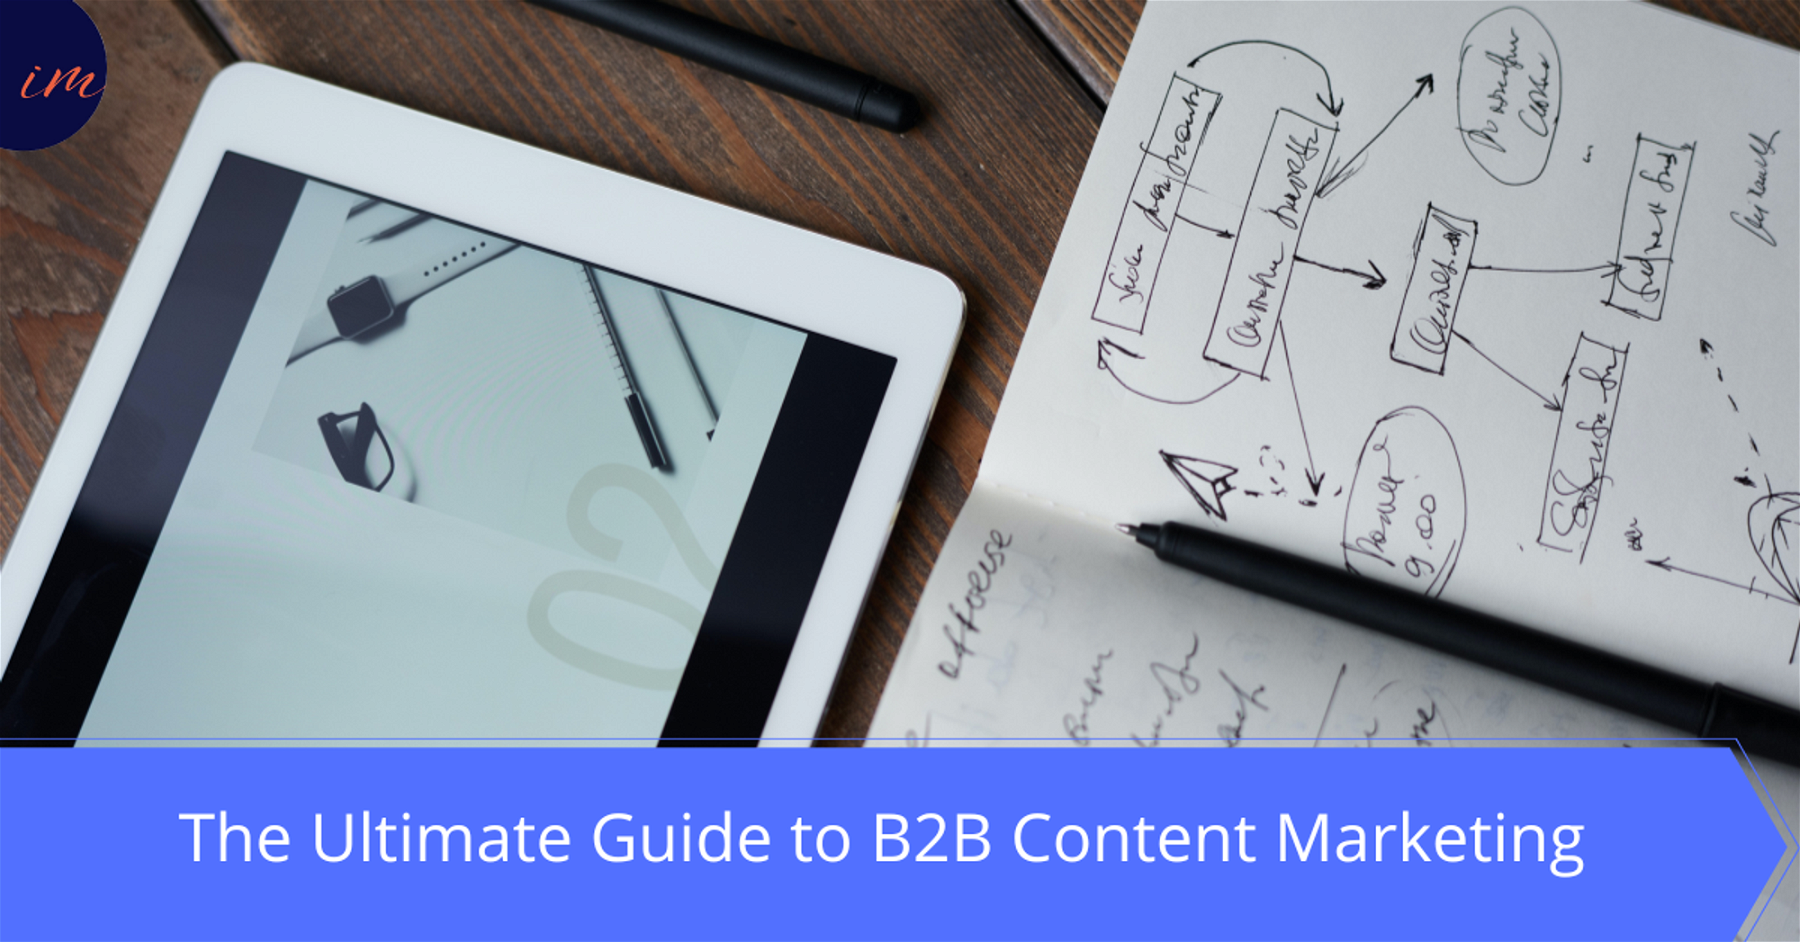 B2B Content Marketing: The Ultimate Guide 